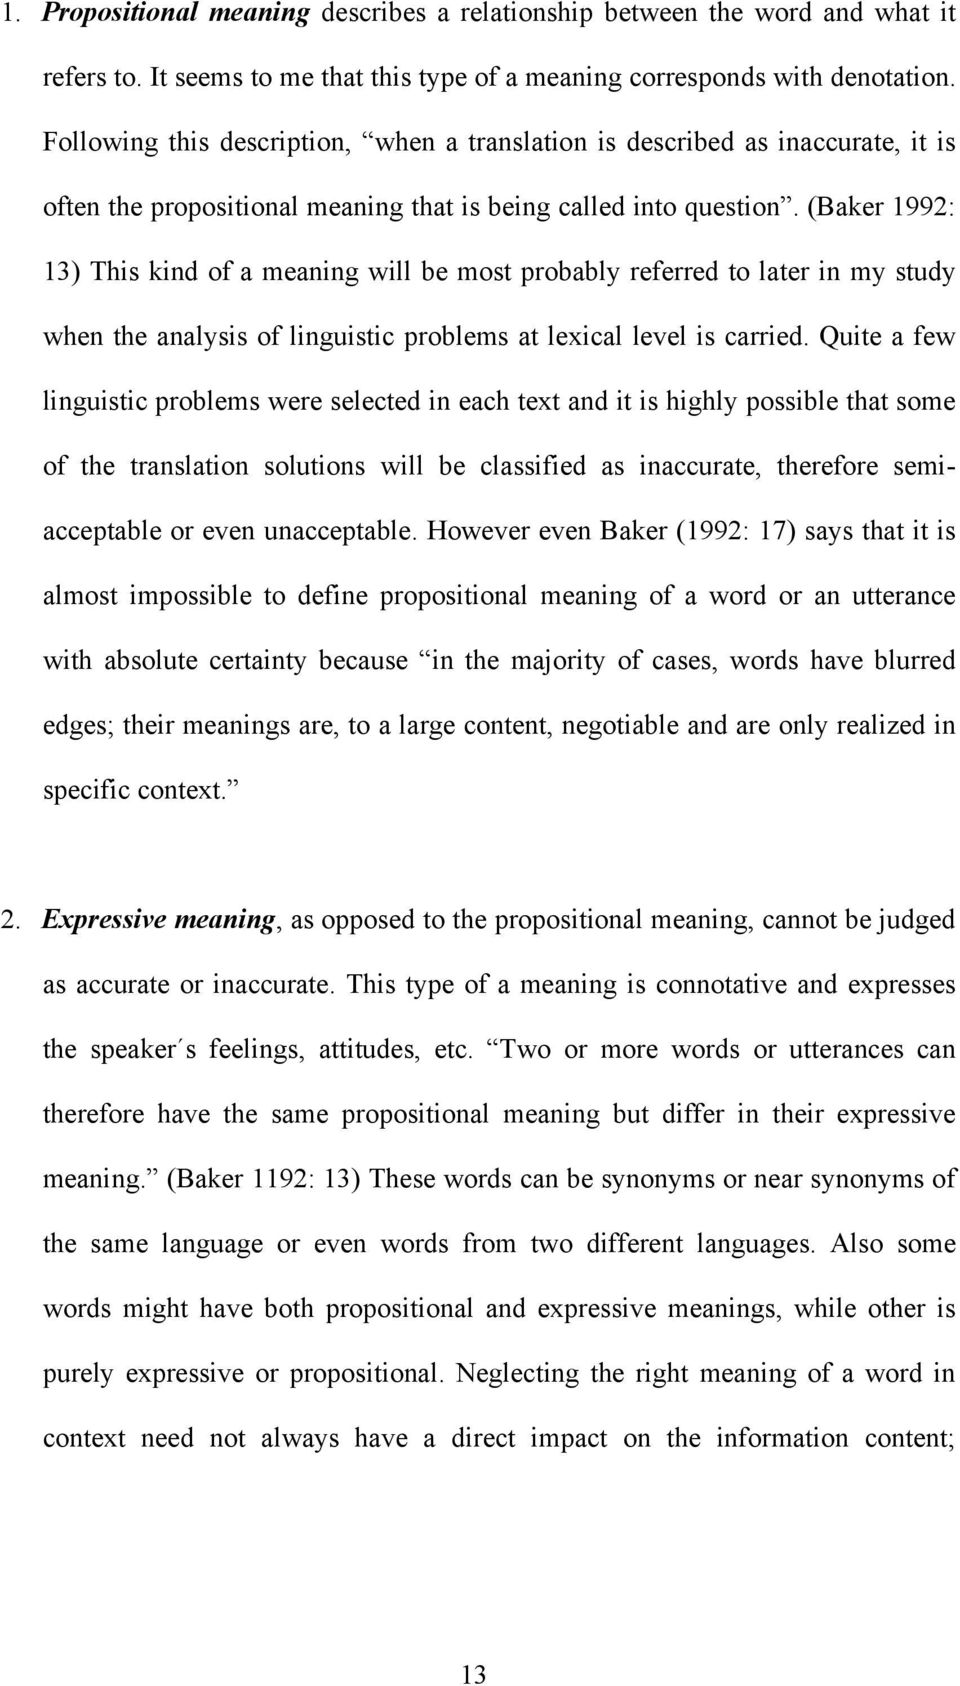 (Baker 1992: 13) This kind of a meaning will be most probably referred to later in my study when the analysis of linguistic problems at lexical level is carried.